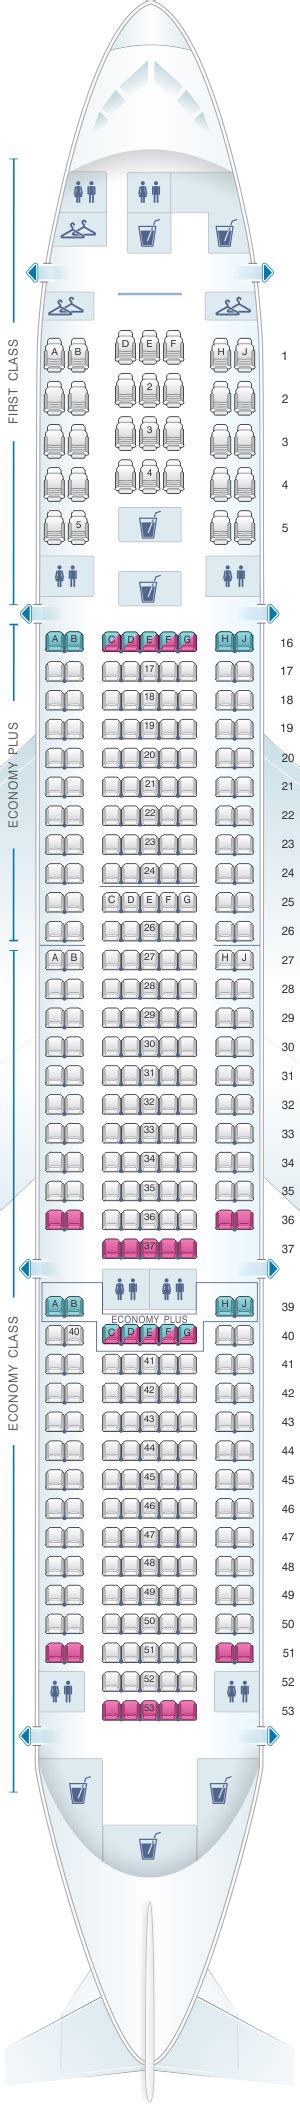 Boeing 777 Seat Map American Airlines Seat Map Boeing 777 200